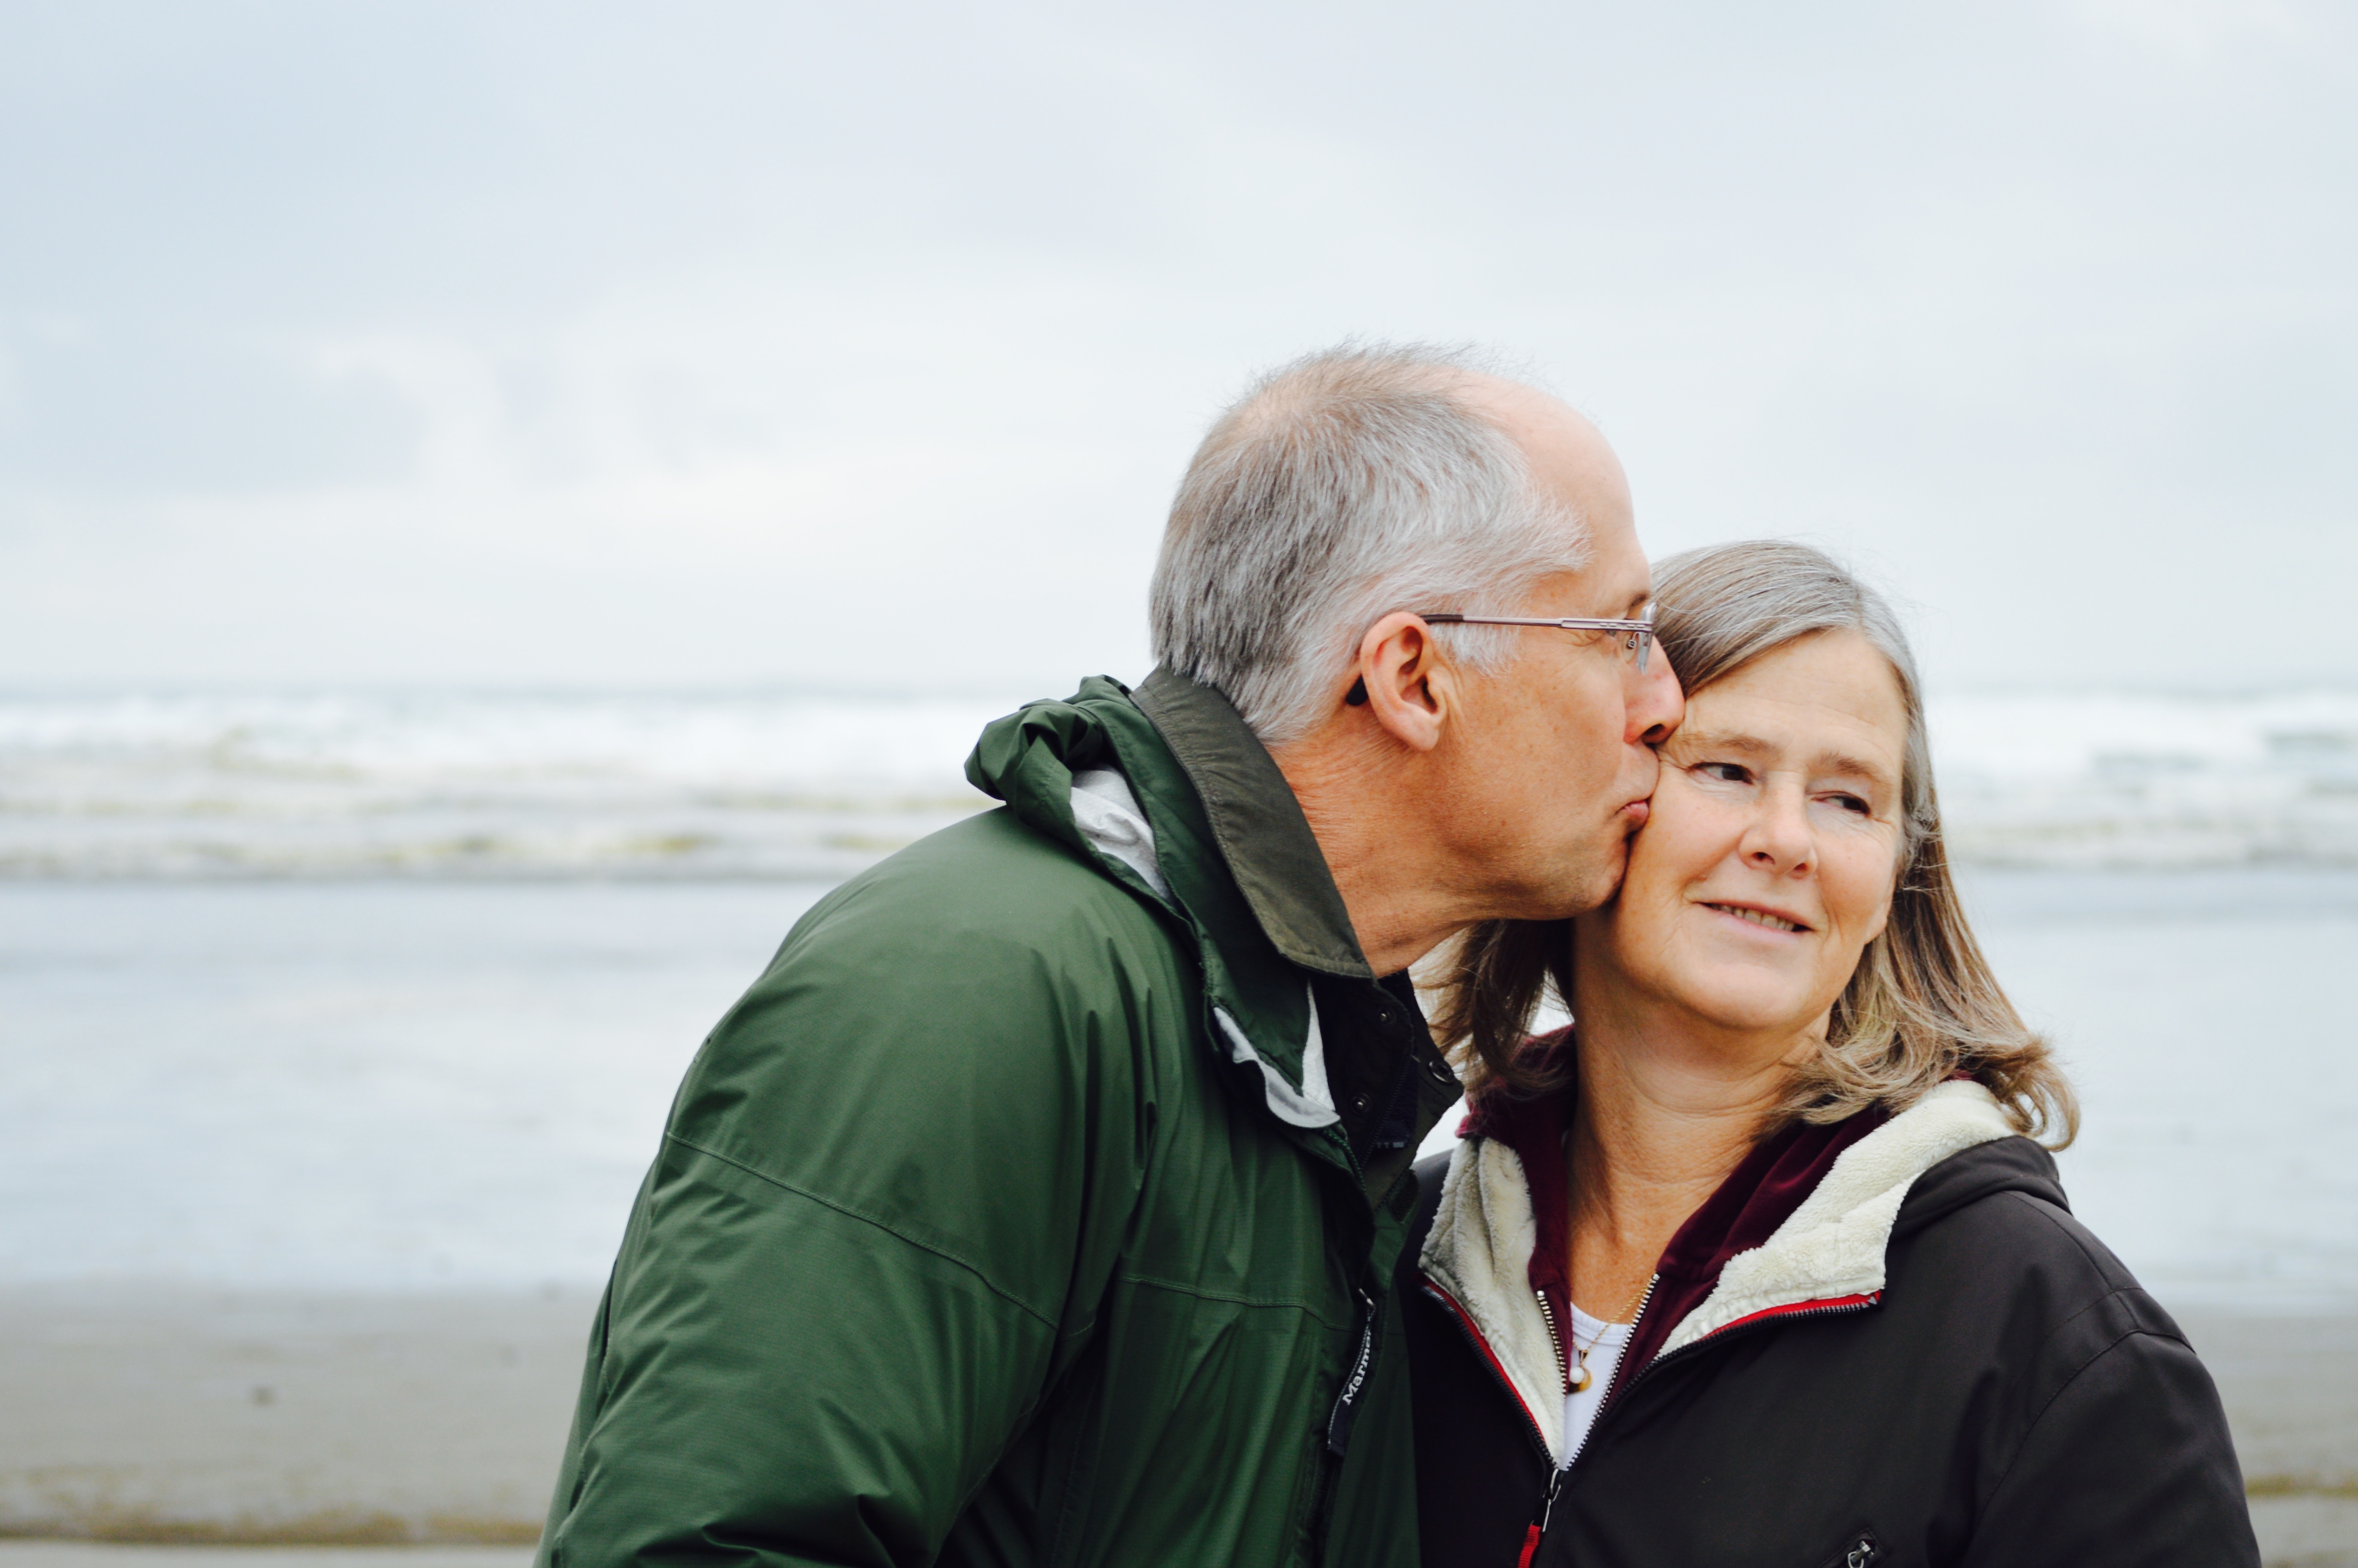 An elderly man kissing his wife on the cheek at the beach.